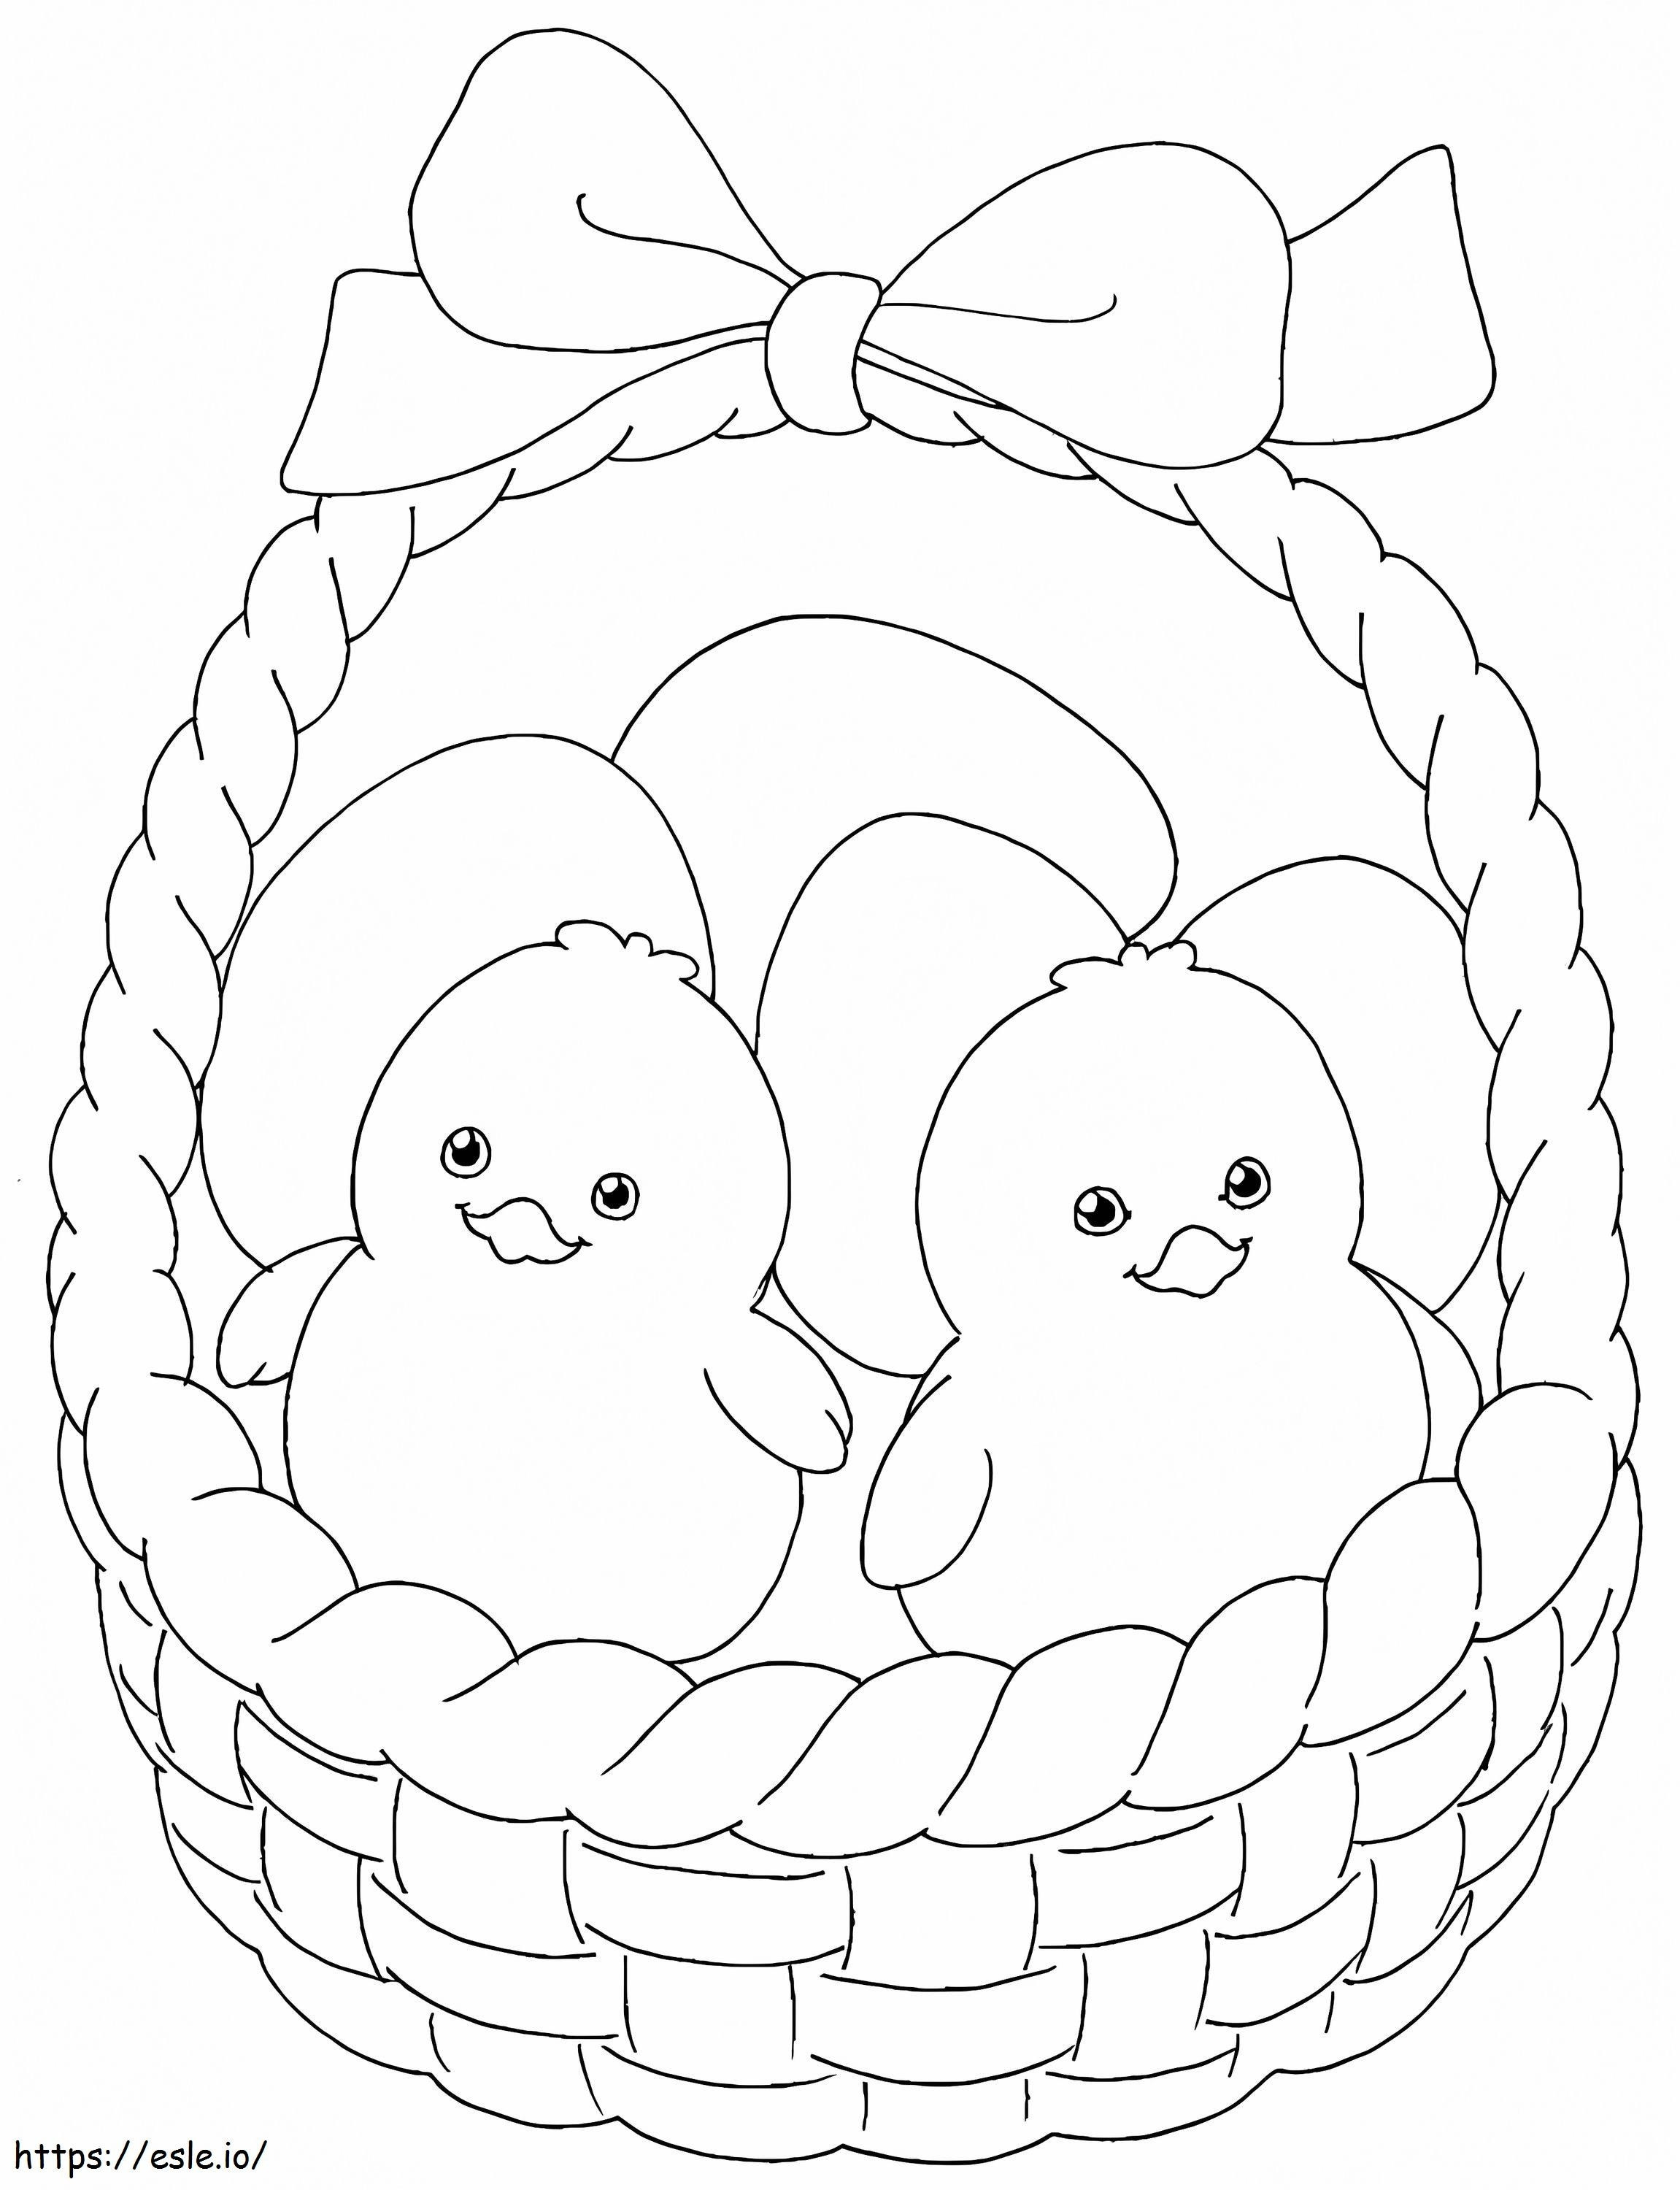 Chicks In Easter Basket coloring page